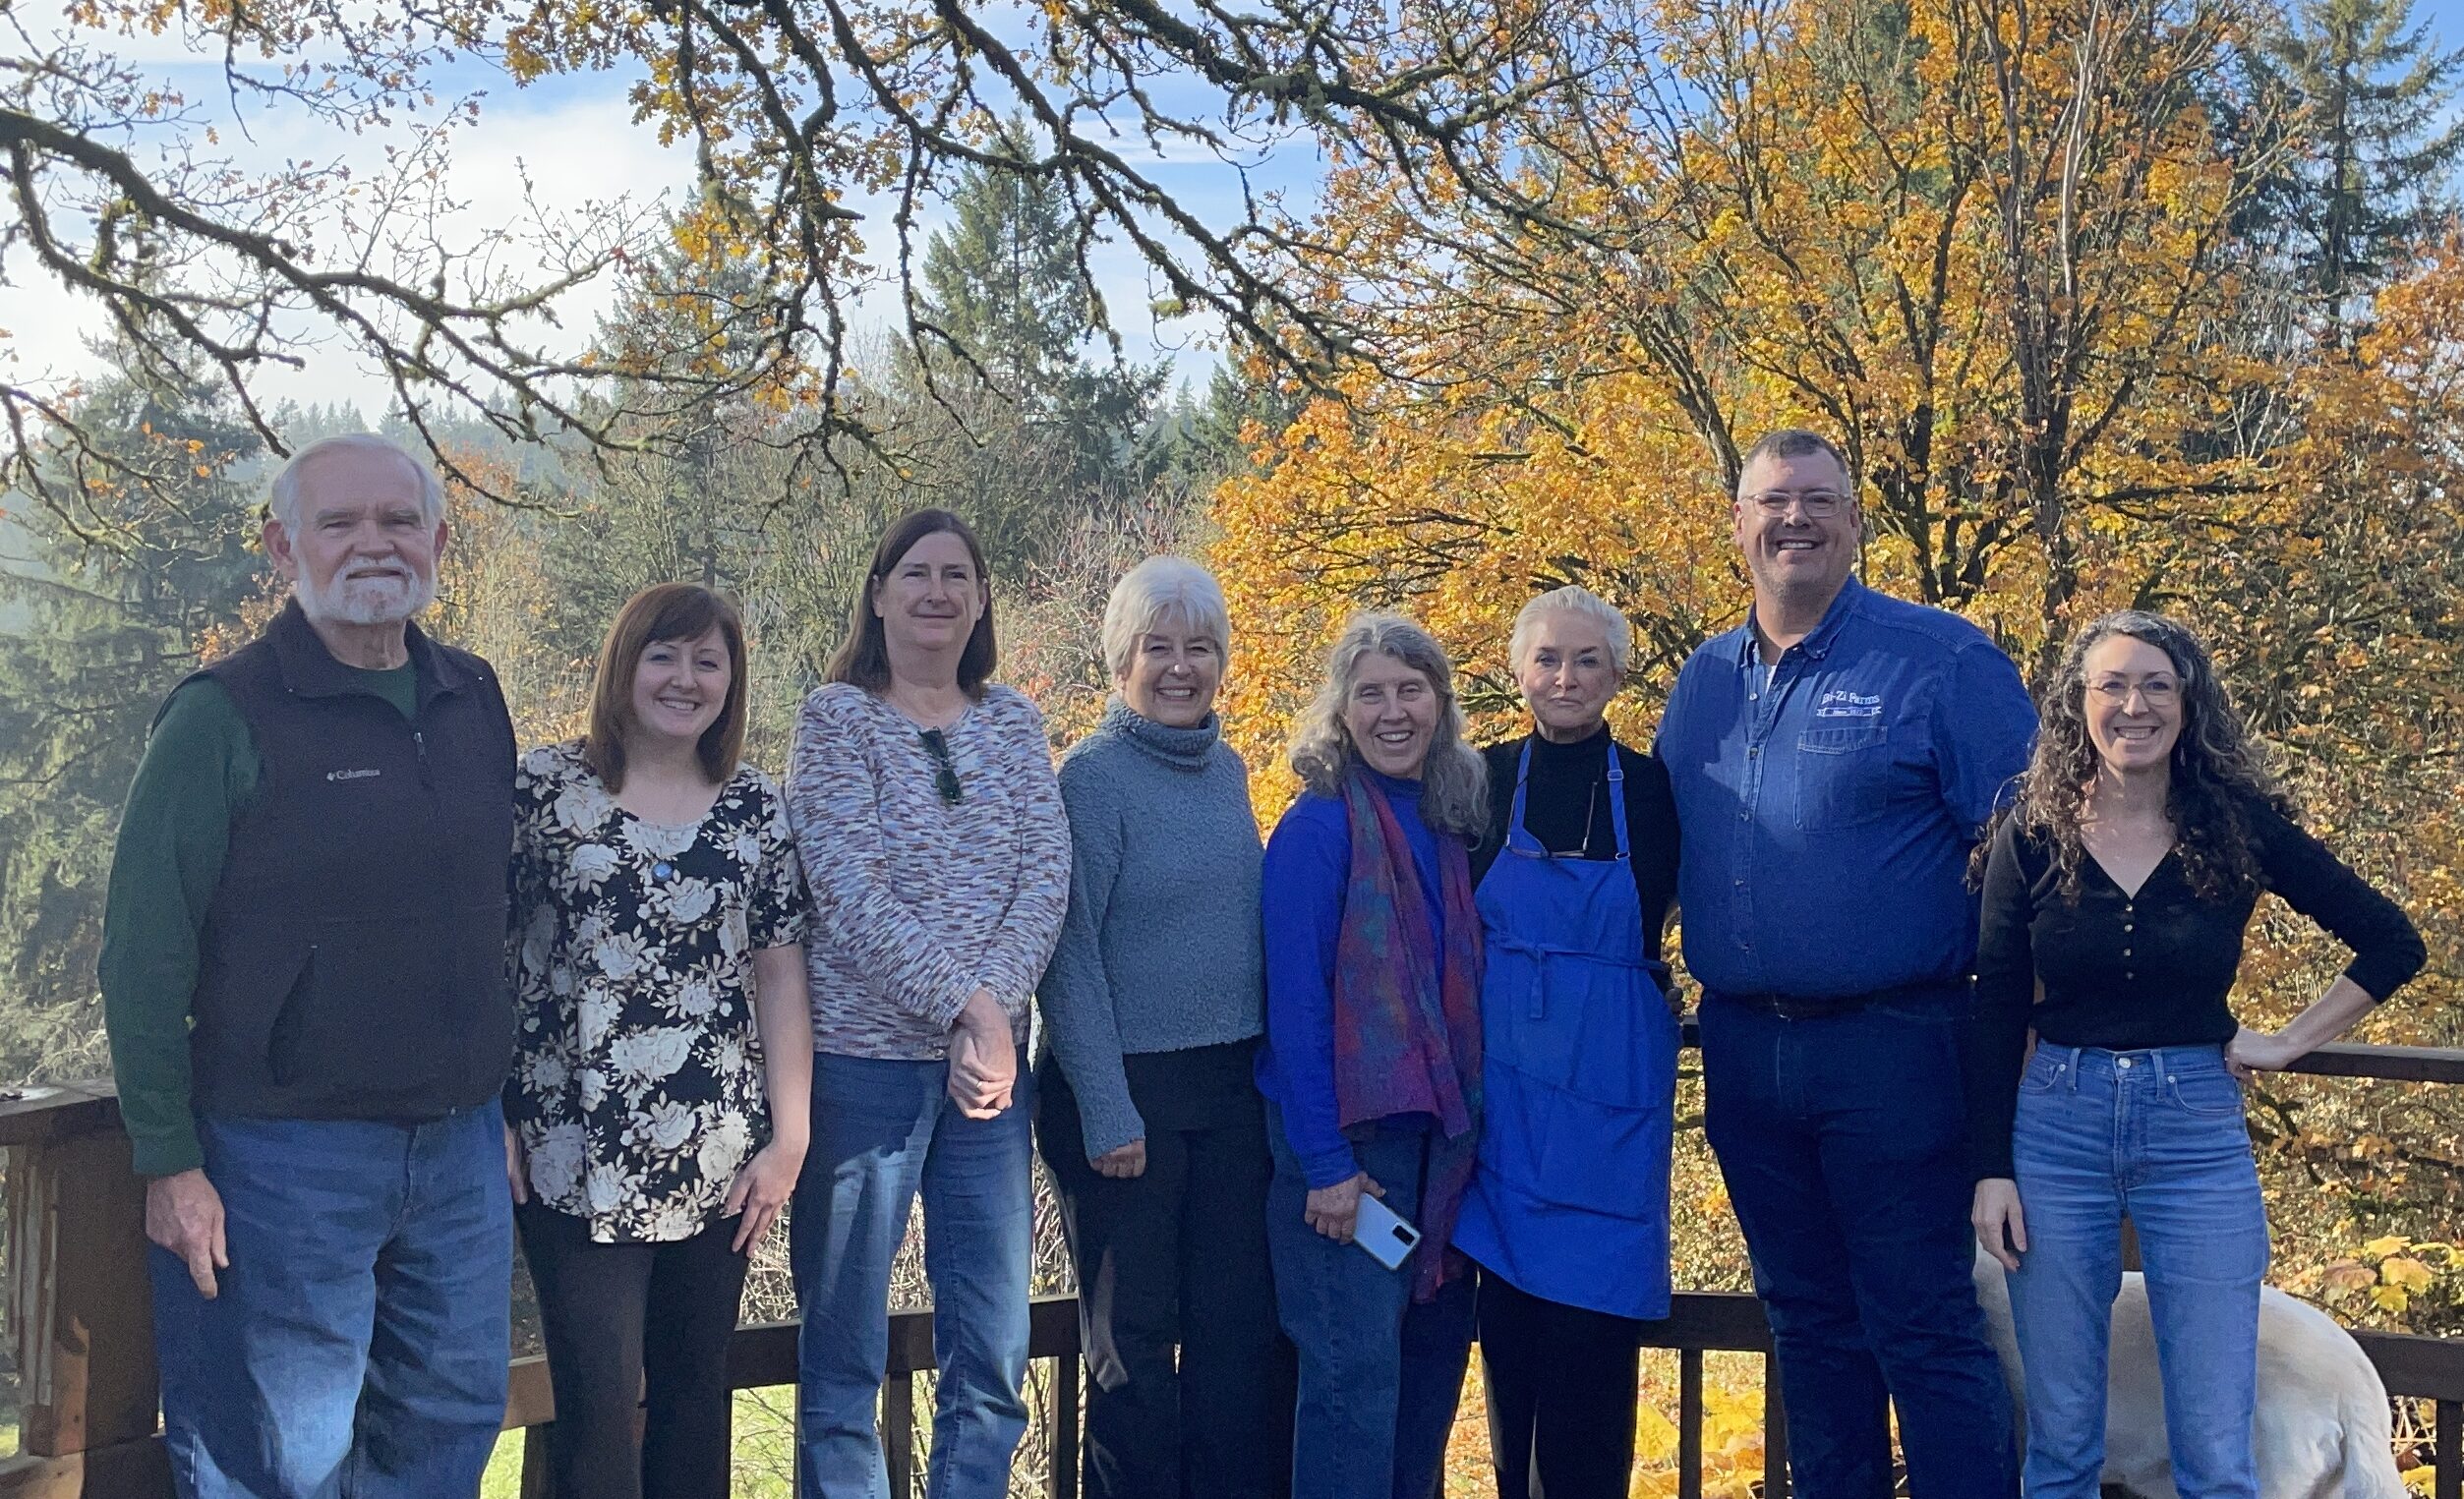 7 FOCC board members and our communications manager smiling on a beautiful fall day. 